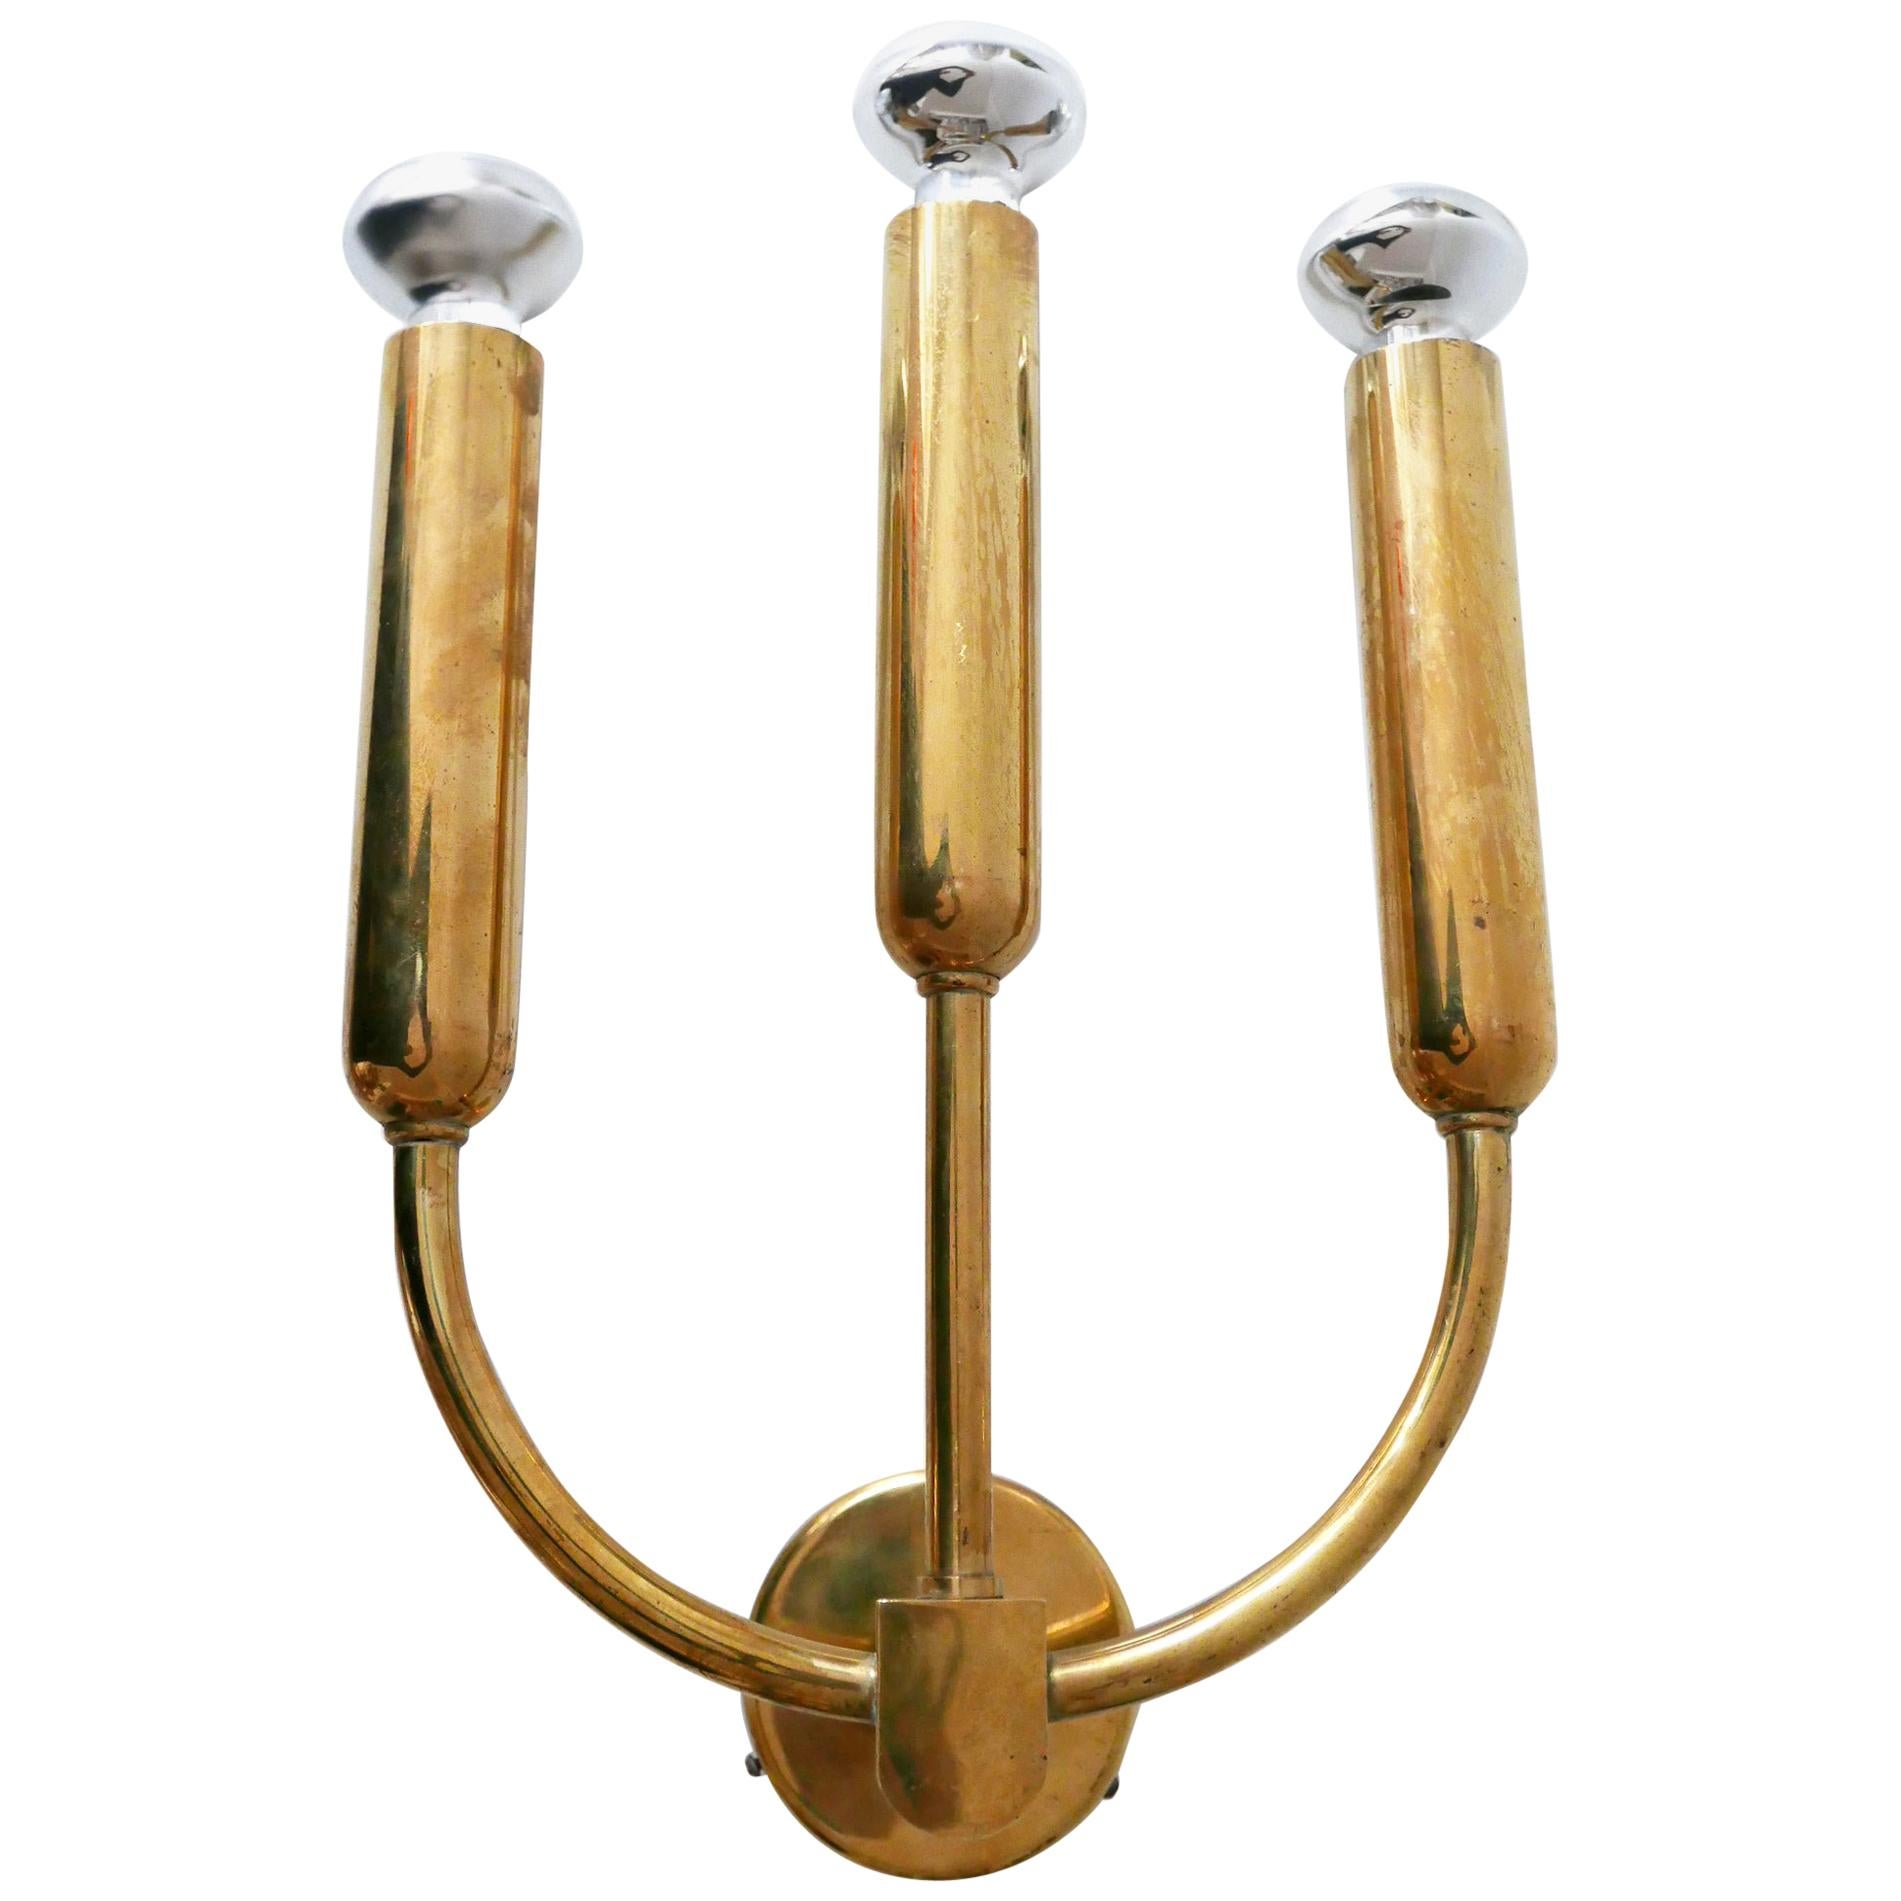 Extremely Rare Three-Flamed Mid-Century Modern Brass Wall Lamp or Sconce, 1950s